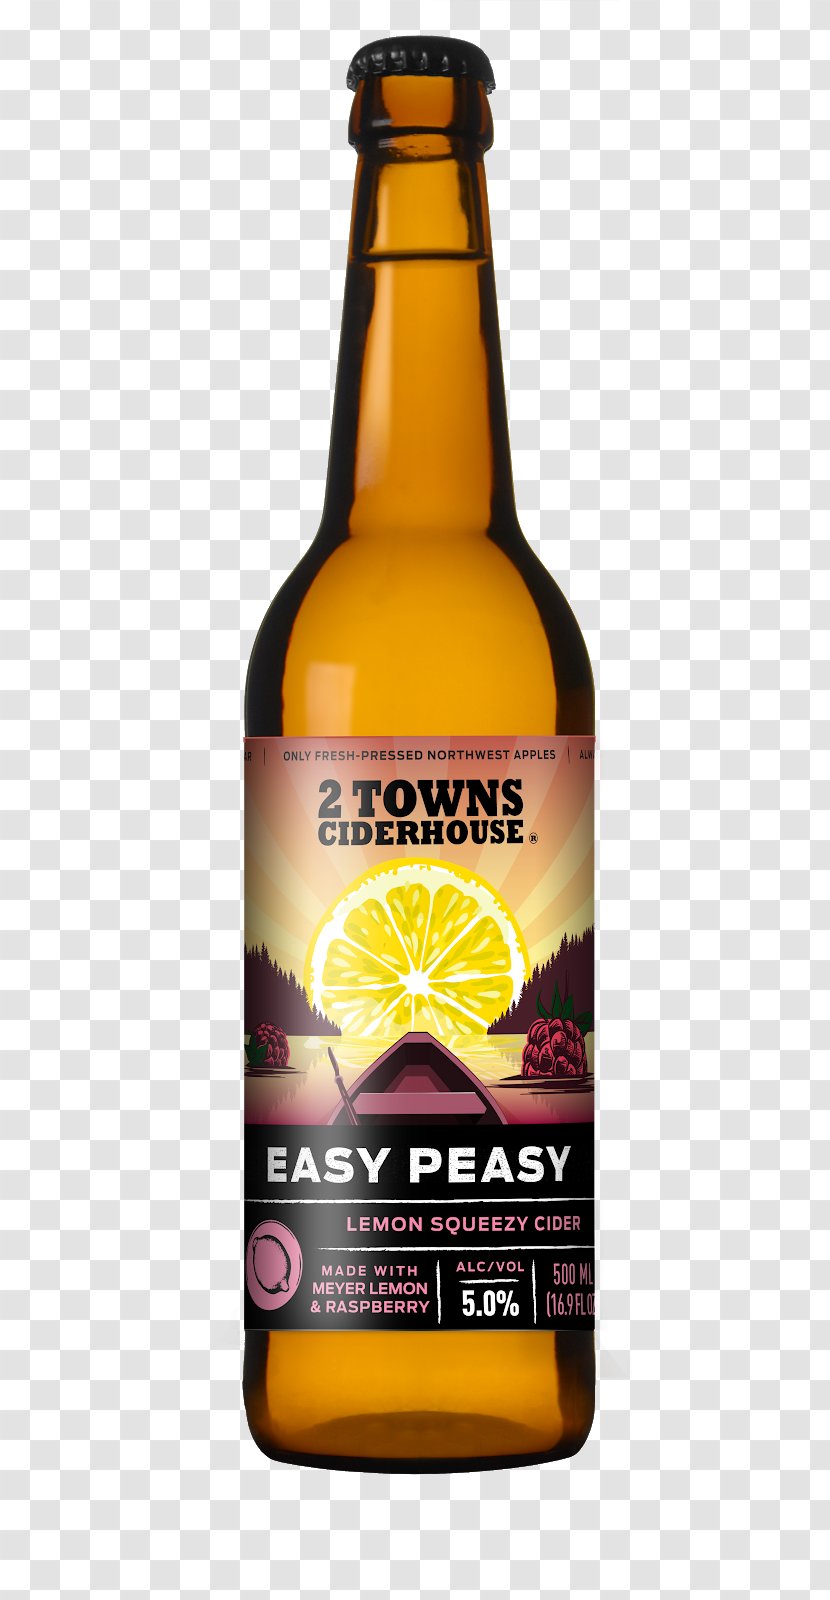 2 Towns Ciderhouse Beer Corvallis Perry - Alcohol By Volume - Homemade Lemon Transparent PNG